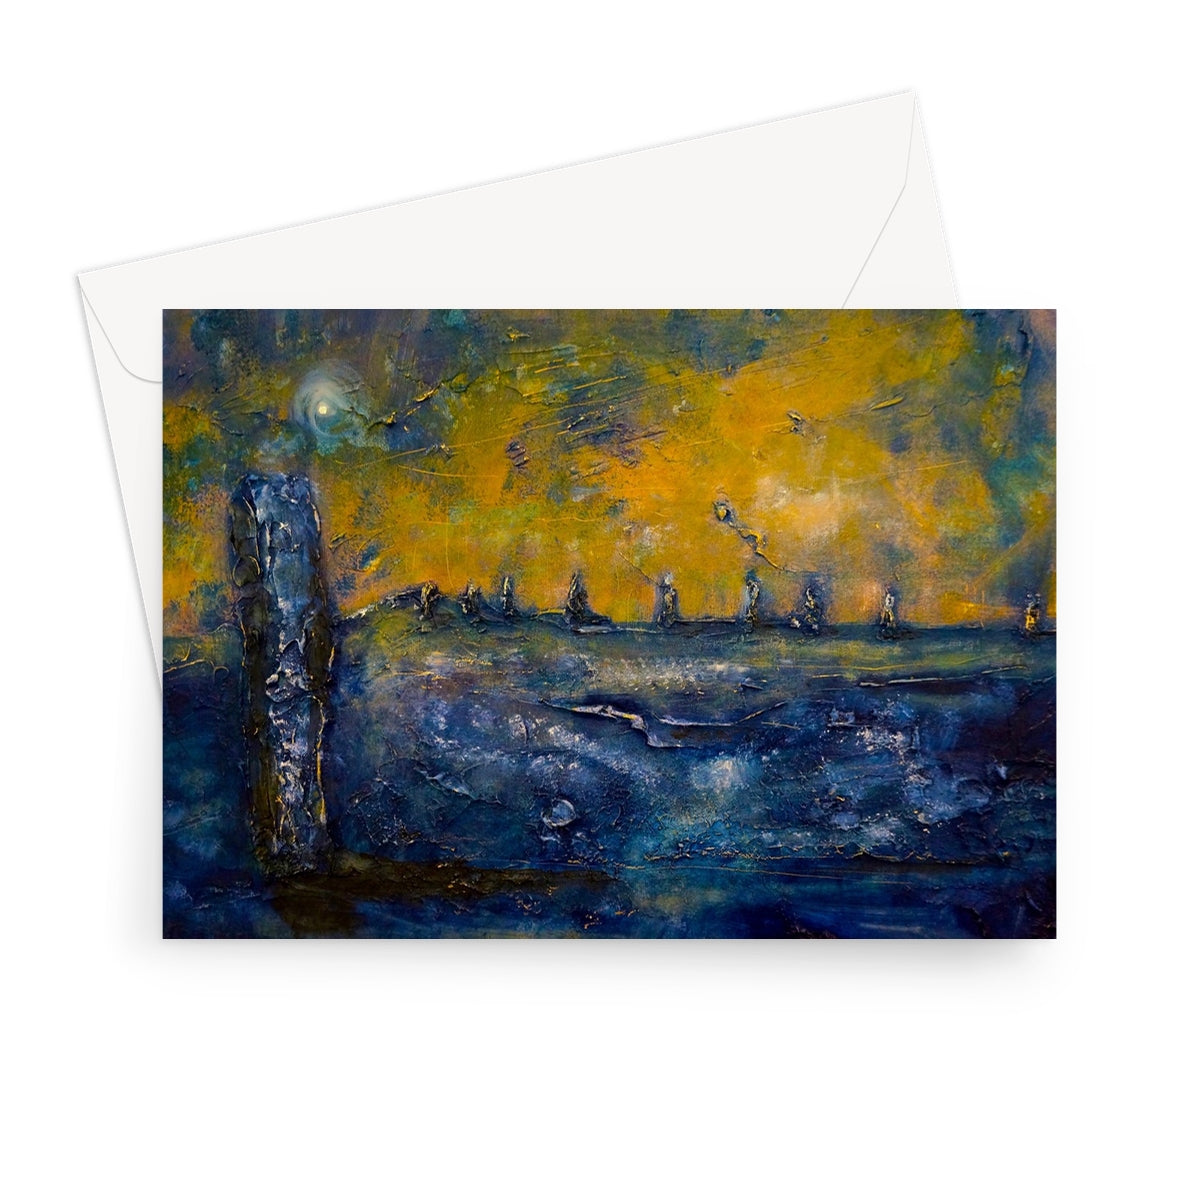 Brodgar Moonlight Orkney Art Gifts Greeting Card-Greetings Cards-Orkney Art Gallery-7"x5"-10 Cards-Paintings, Prints, Homeware, Art Gifts From Scotland By Scottish Artist Kevin Hunter